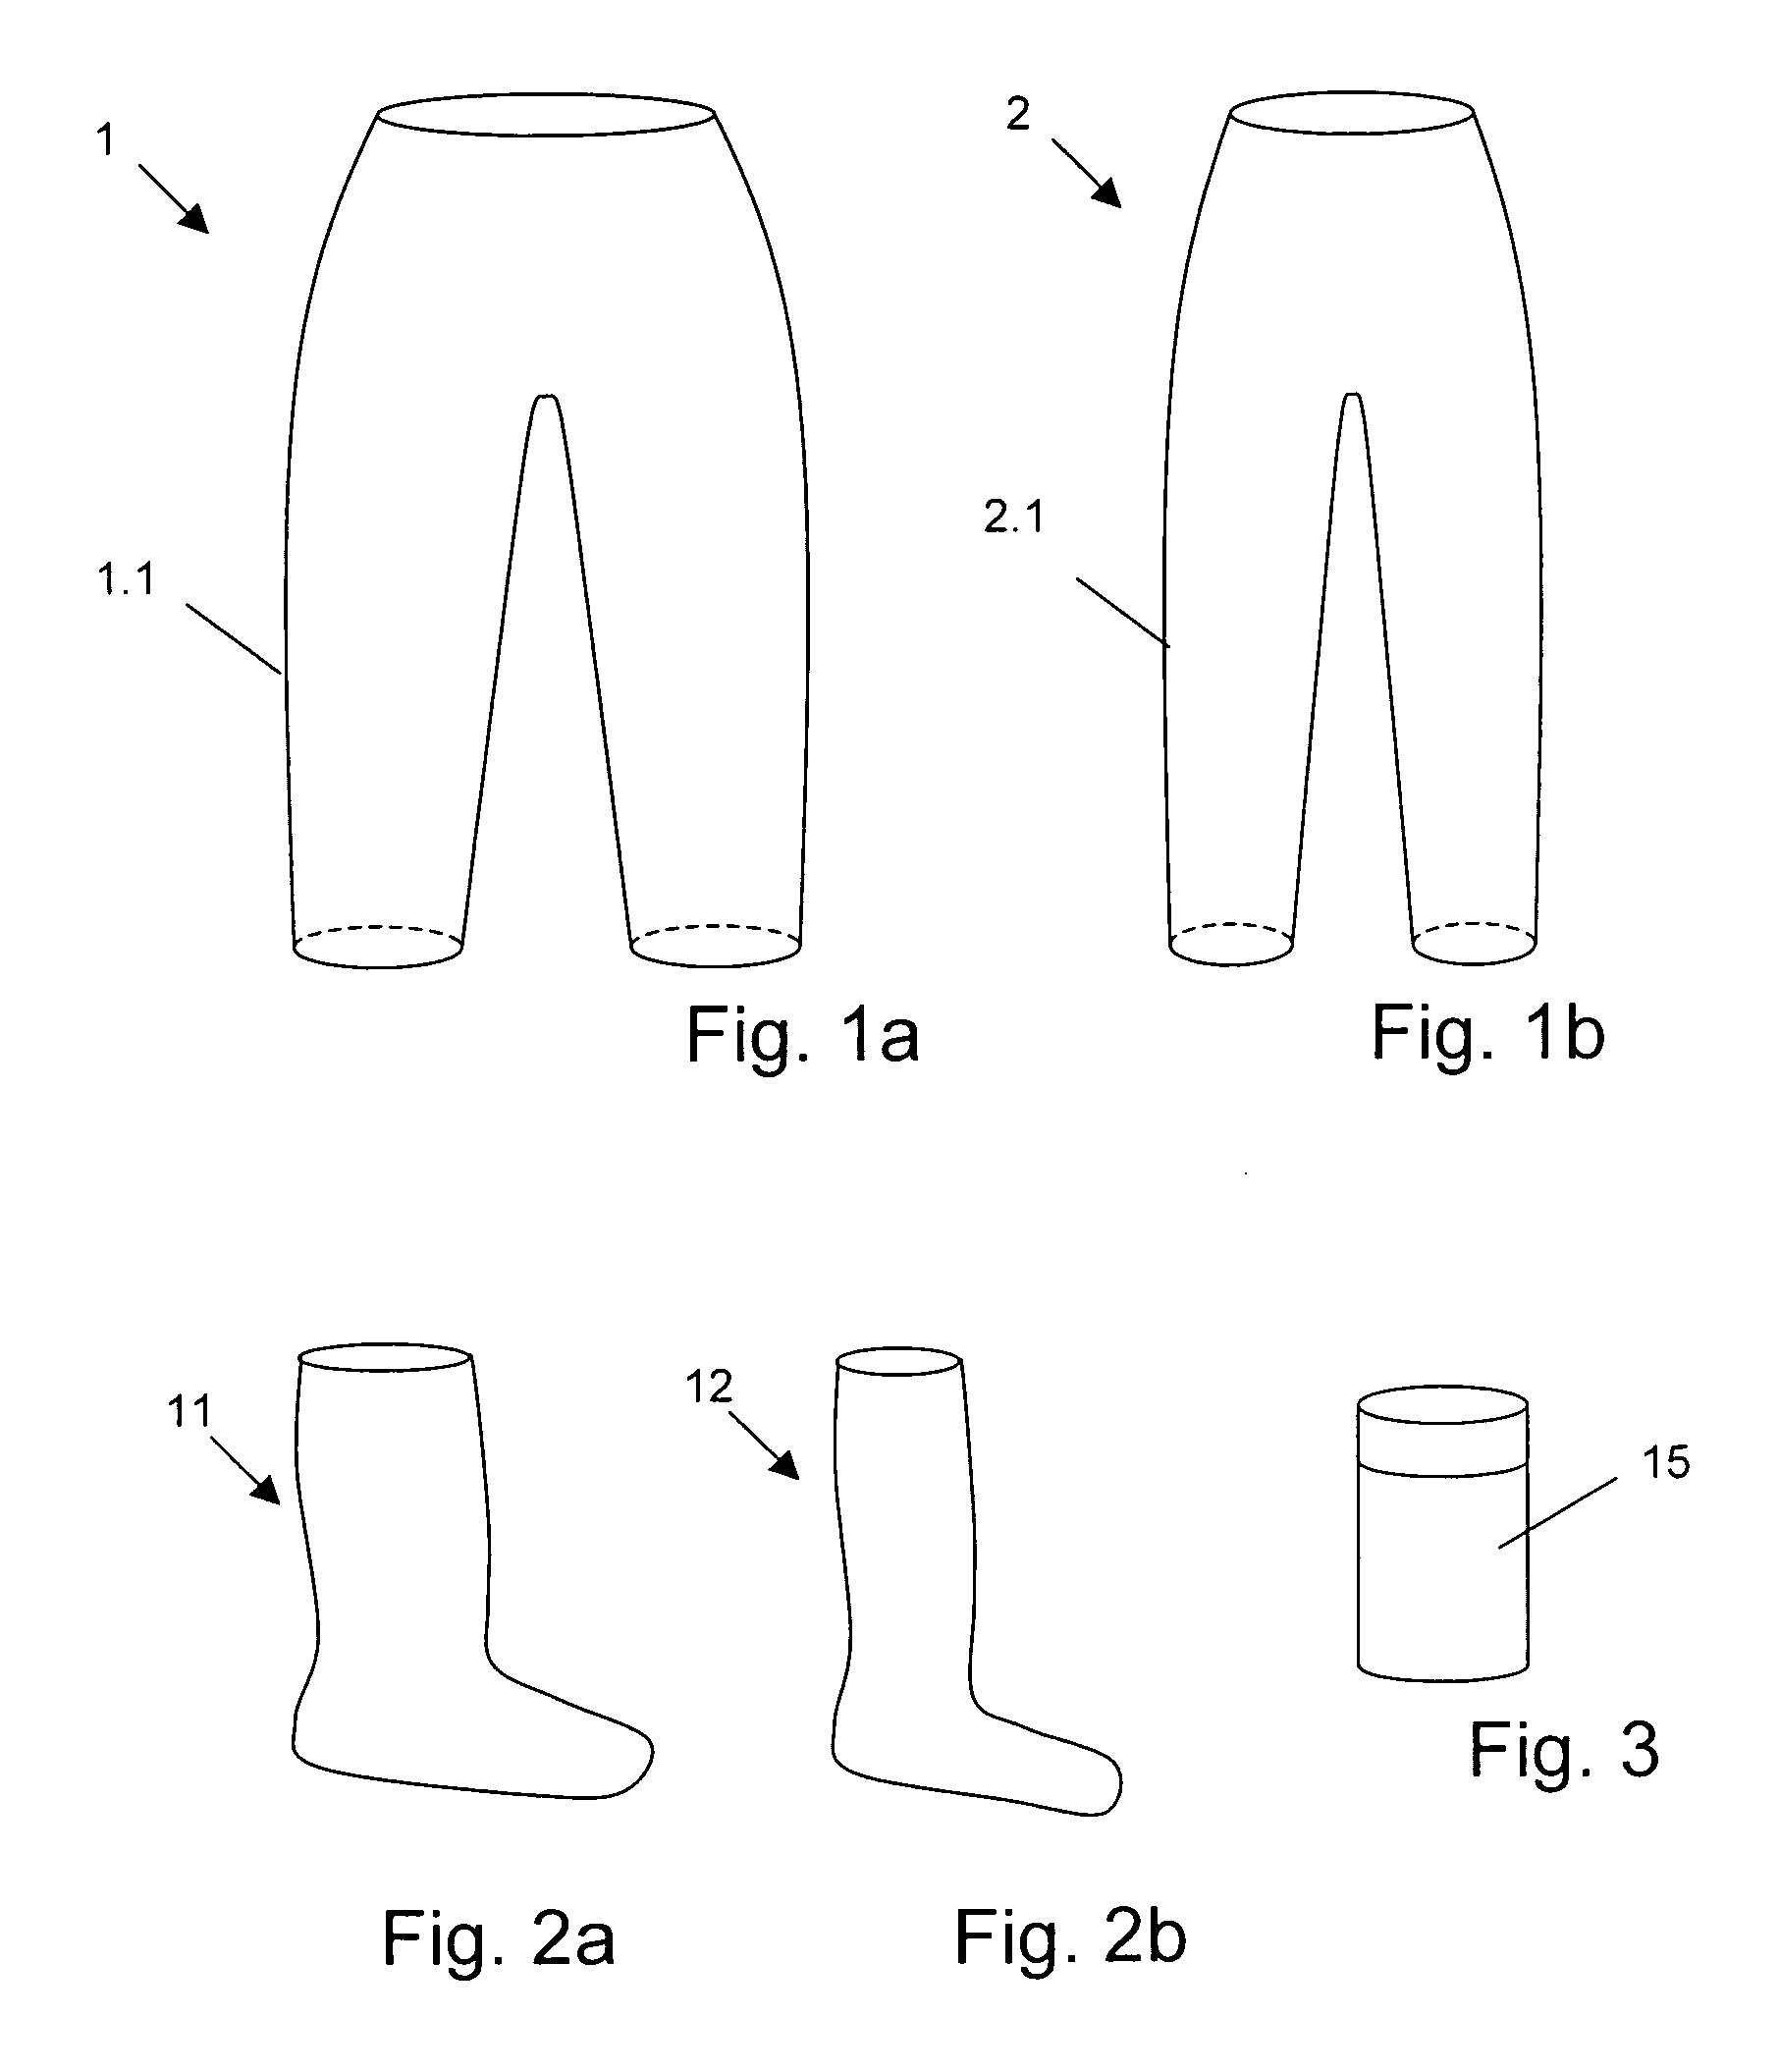 Method and Device for Tending or Treating Body Tissue or for Shaping the Figure